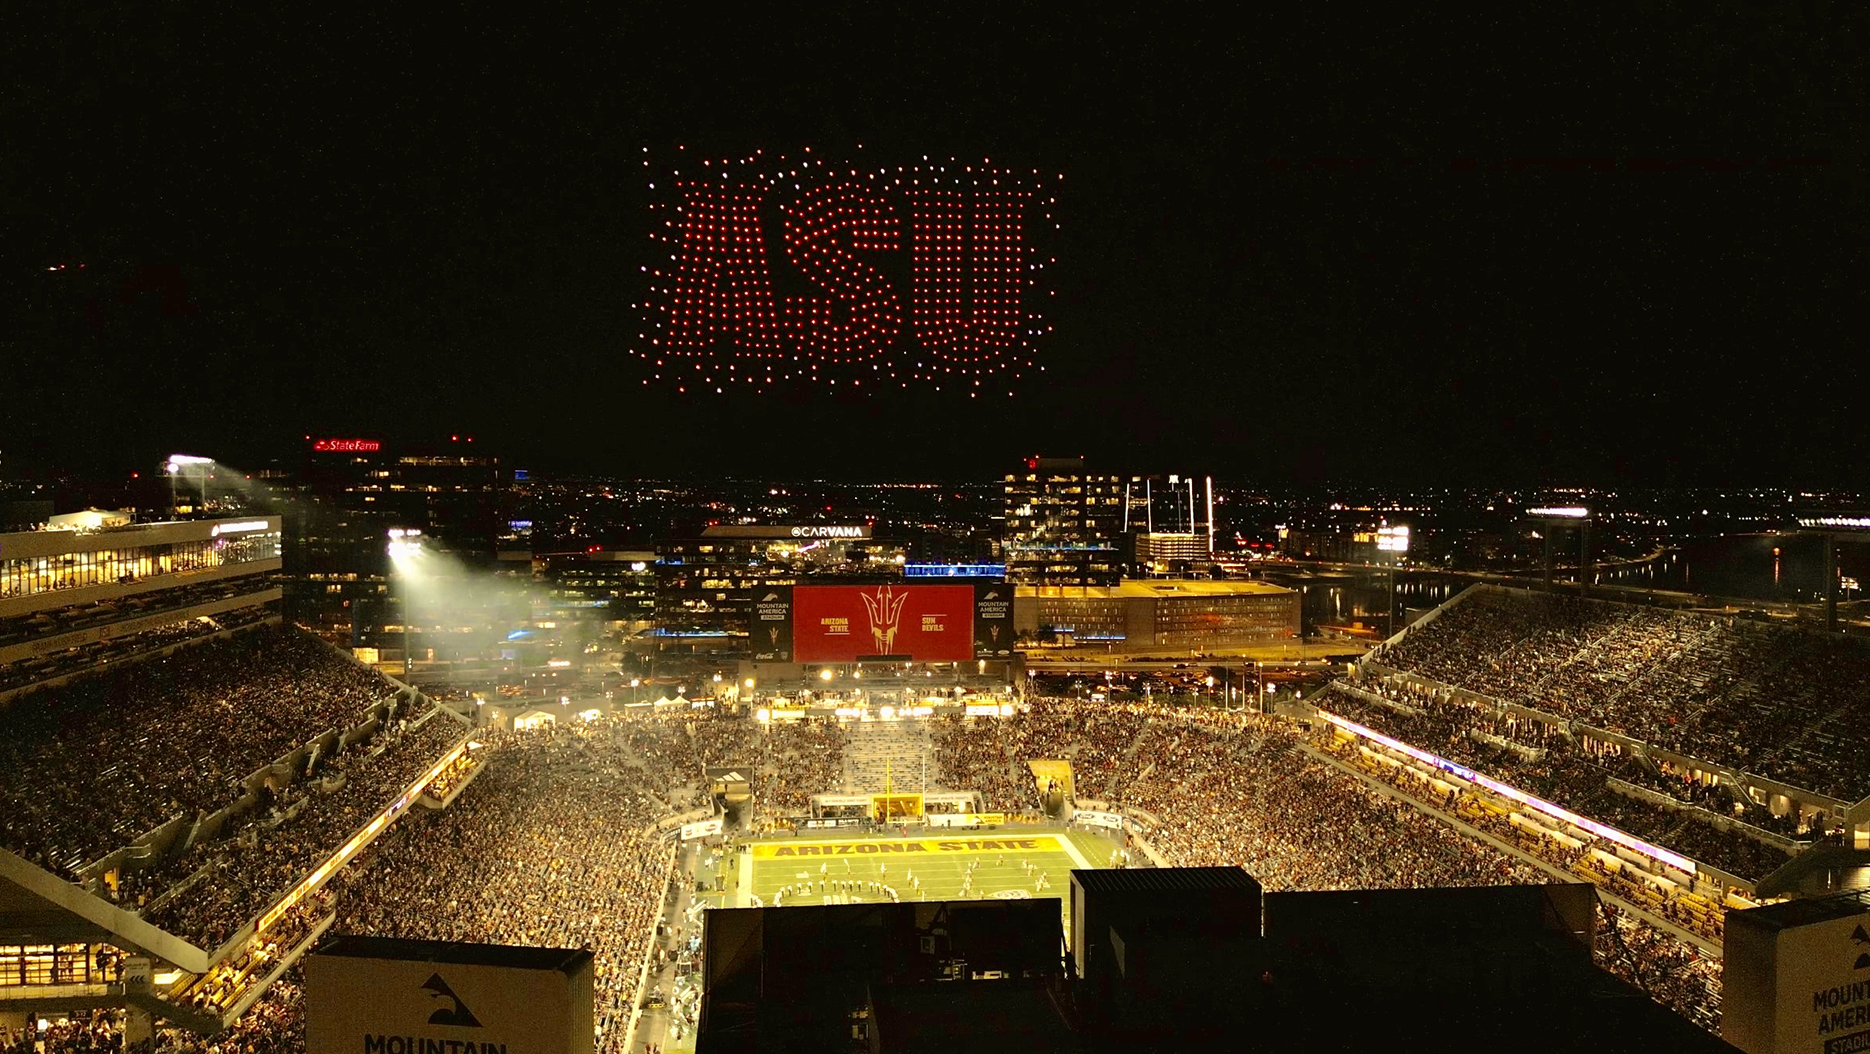 ASU Students Design a 600 Drone Halftime Show in a new Academic Partnership with Nova Sky Stories